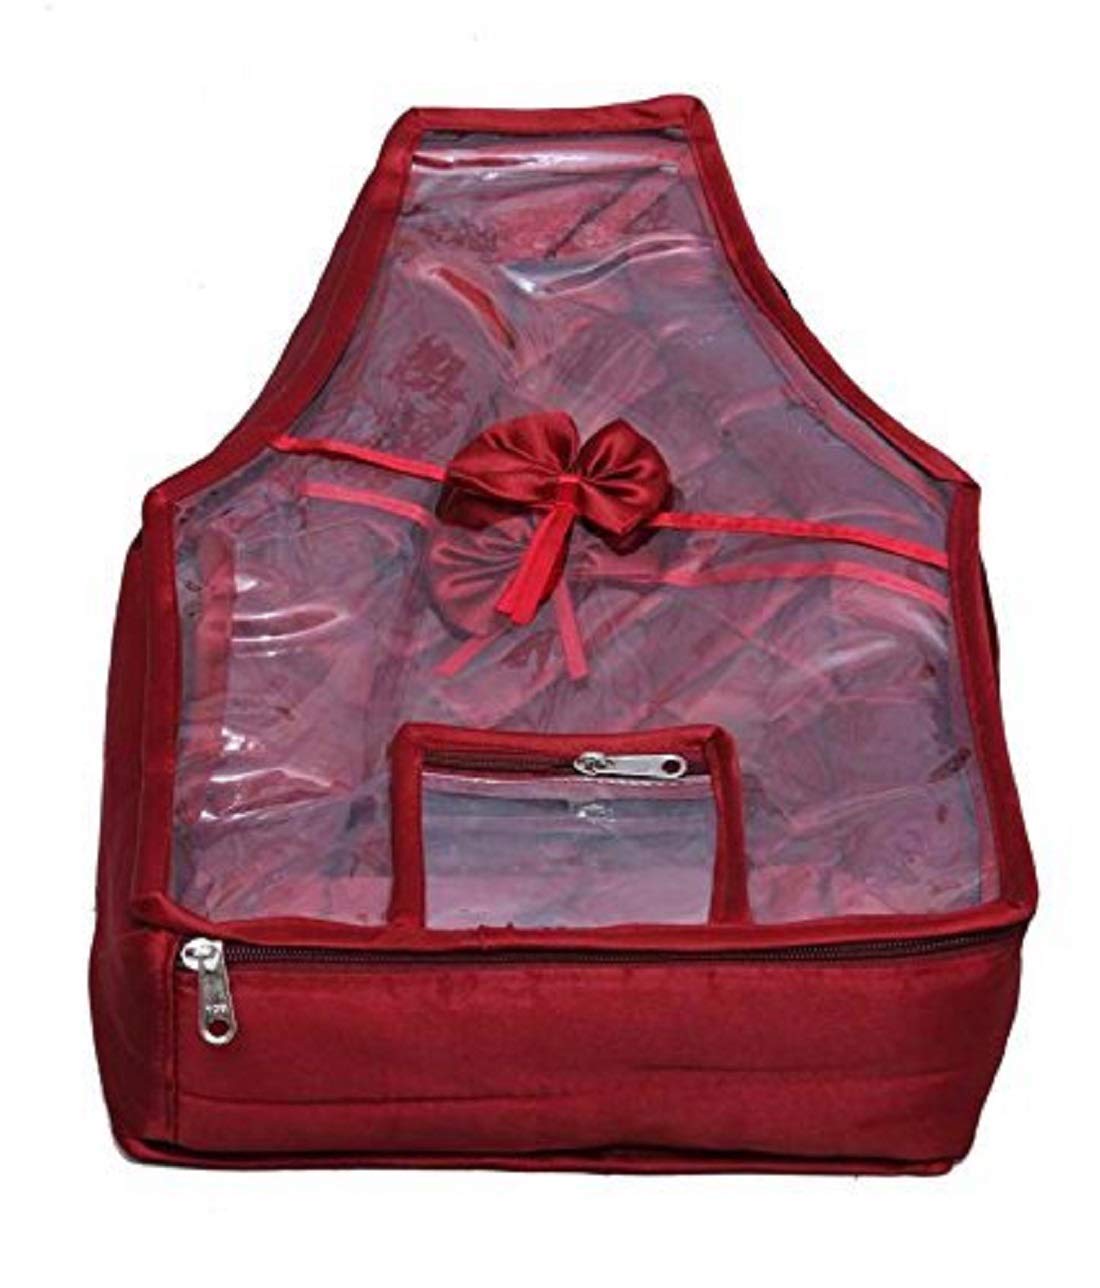 Kuber Industries Non Woven Blouse Cover/Cloth Organizer|Solid Color & Foldable Non woven Fabric|Tranparent Window With Zipper closure|Size 43 x 30 x 13, (Maroon)